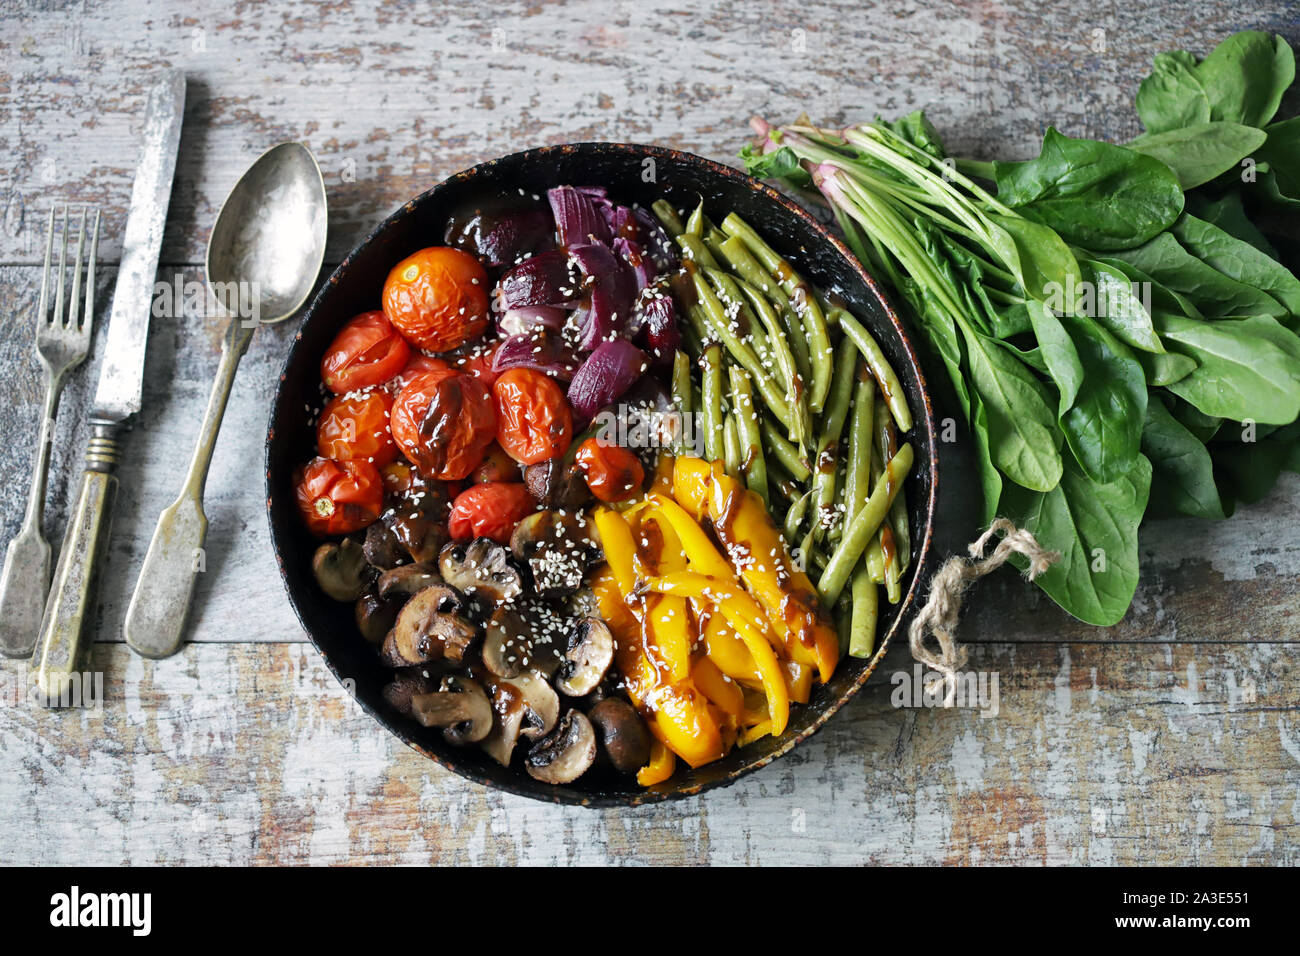 Baked vegetables in a pan. Vegan dish. Autumn food. Stock Photo